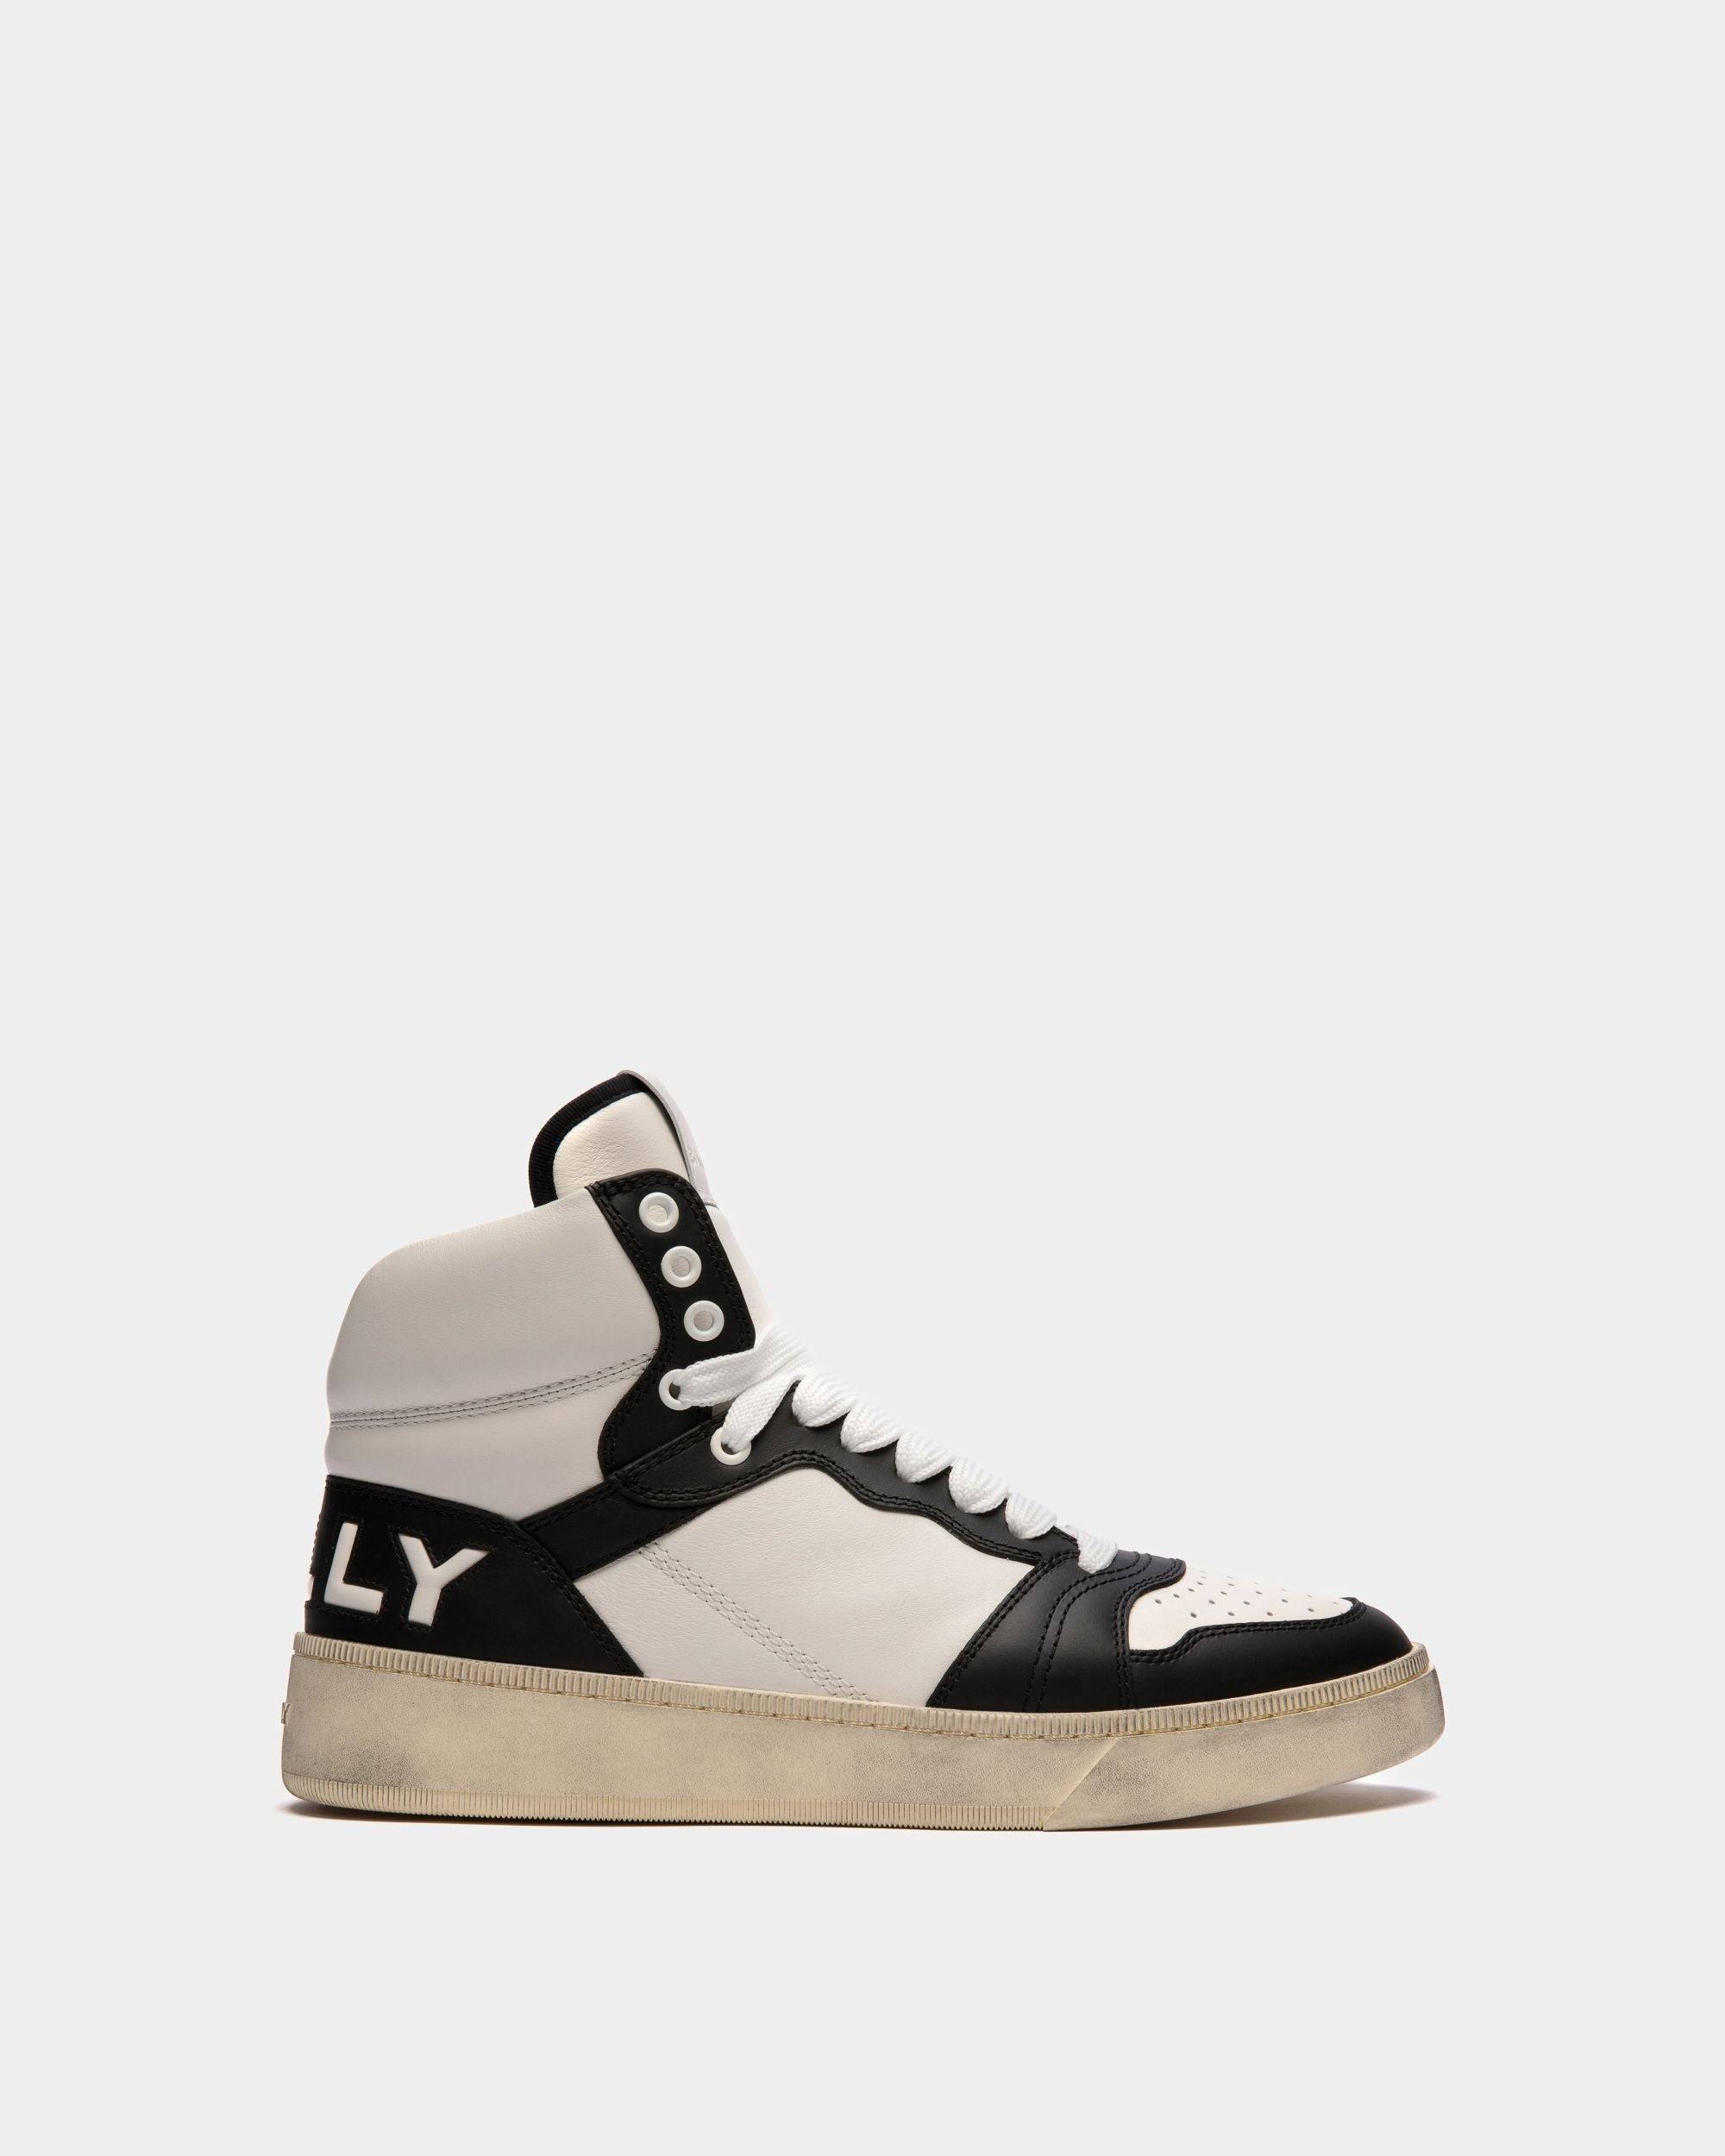 Men's Raise High-Top Sneaker in Black And White Leather | Bally | Still Life Side